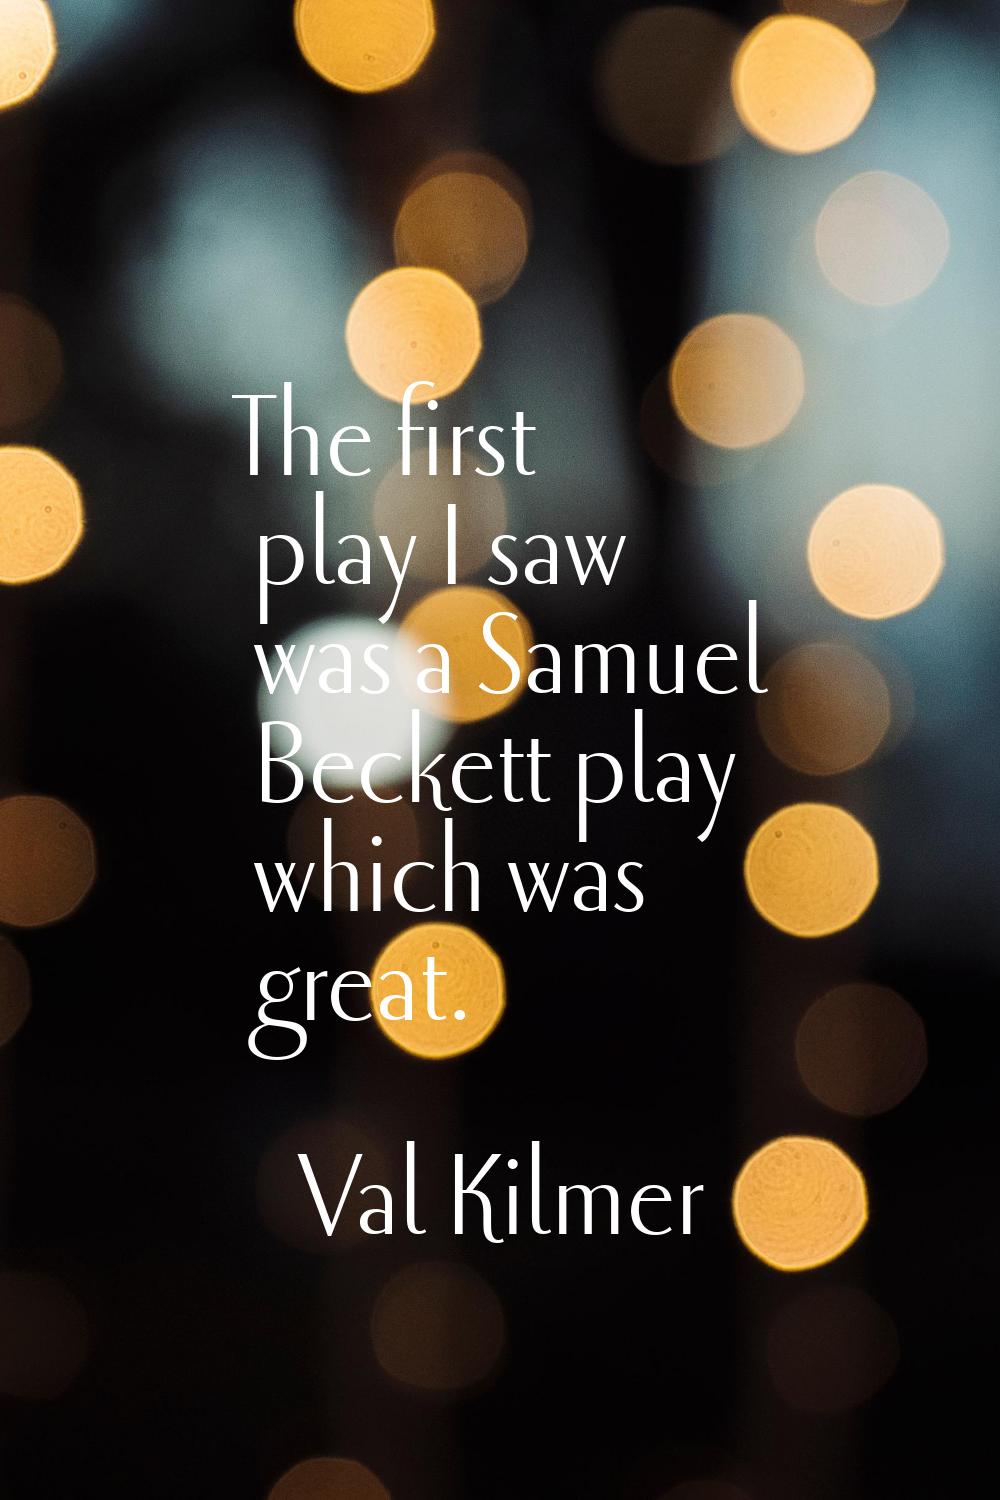 The first play I saw was a Samuel Beckett play which was great.